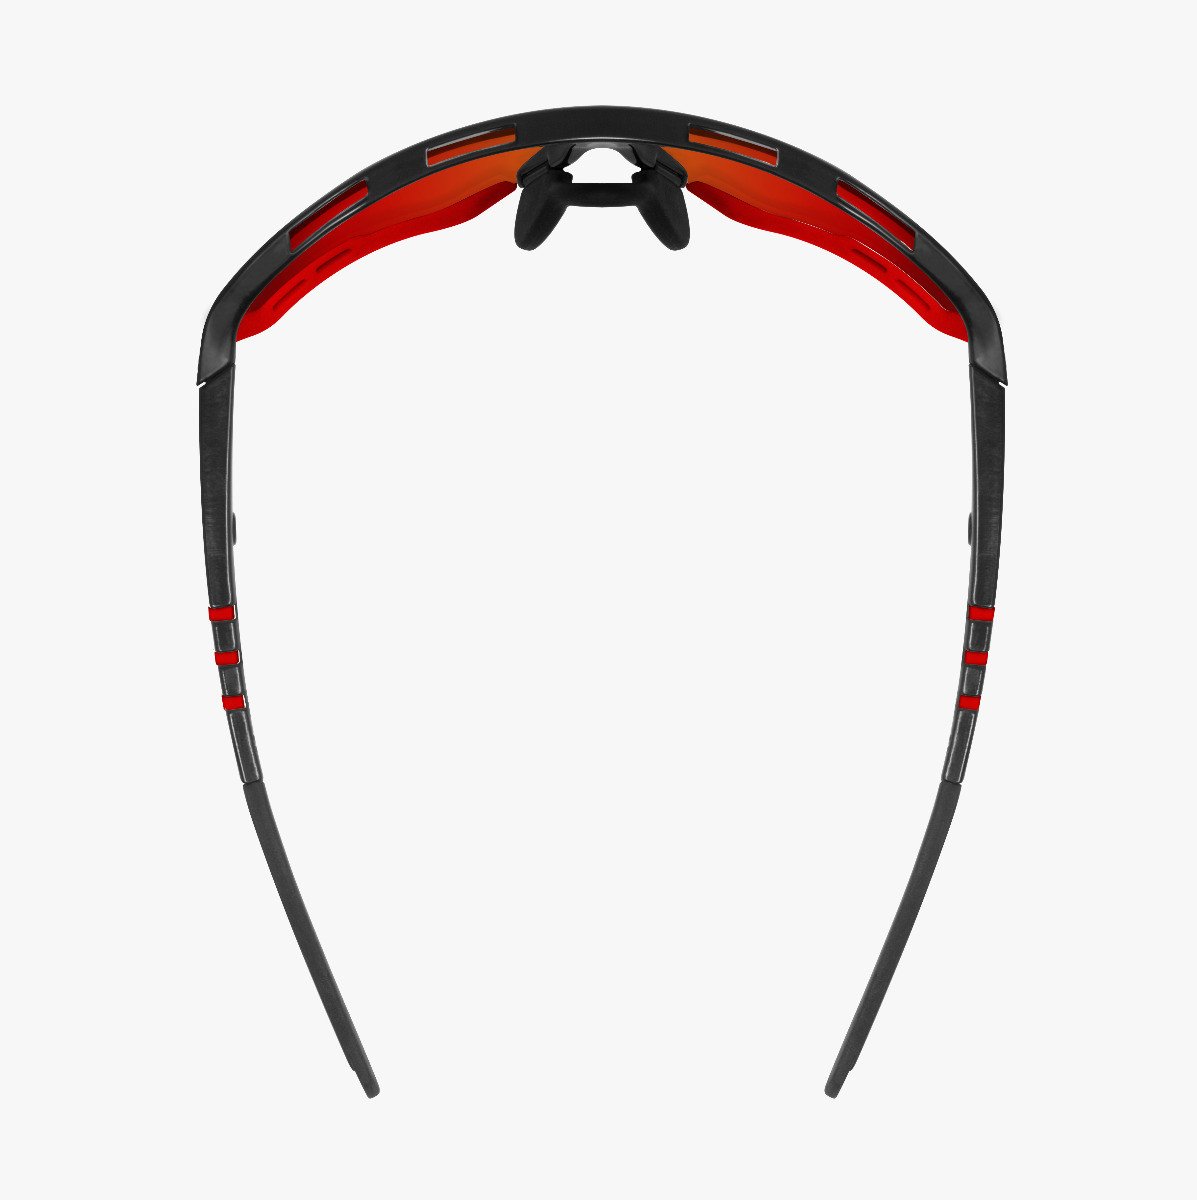 Scicon Sports | Aerotech Sport Cycling Performance Sunglasses - Black Gloss / Photocromatic Red - EY13160203